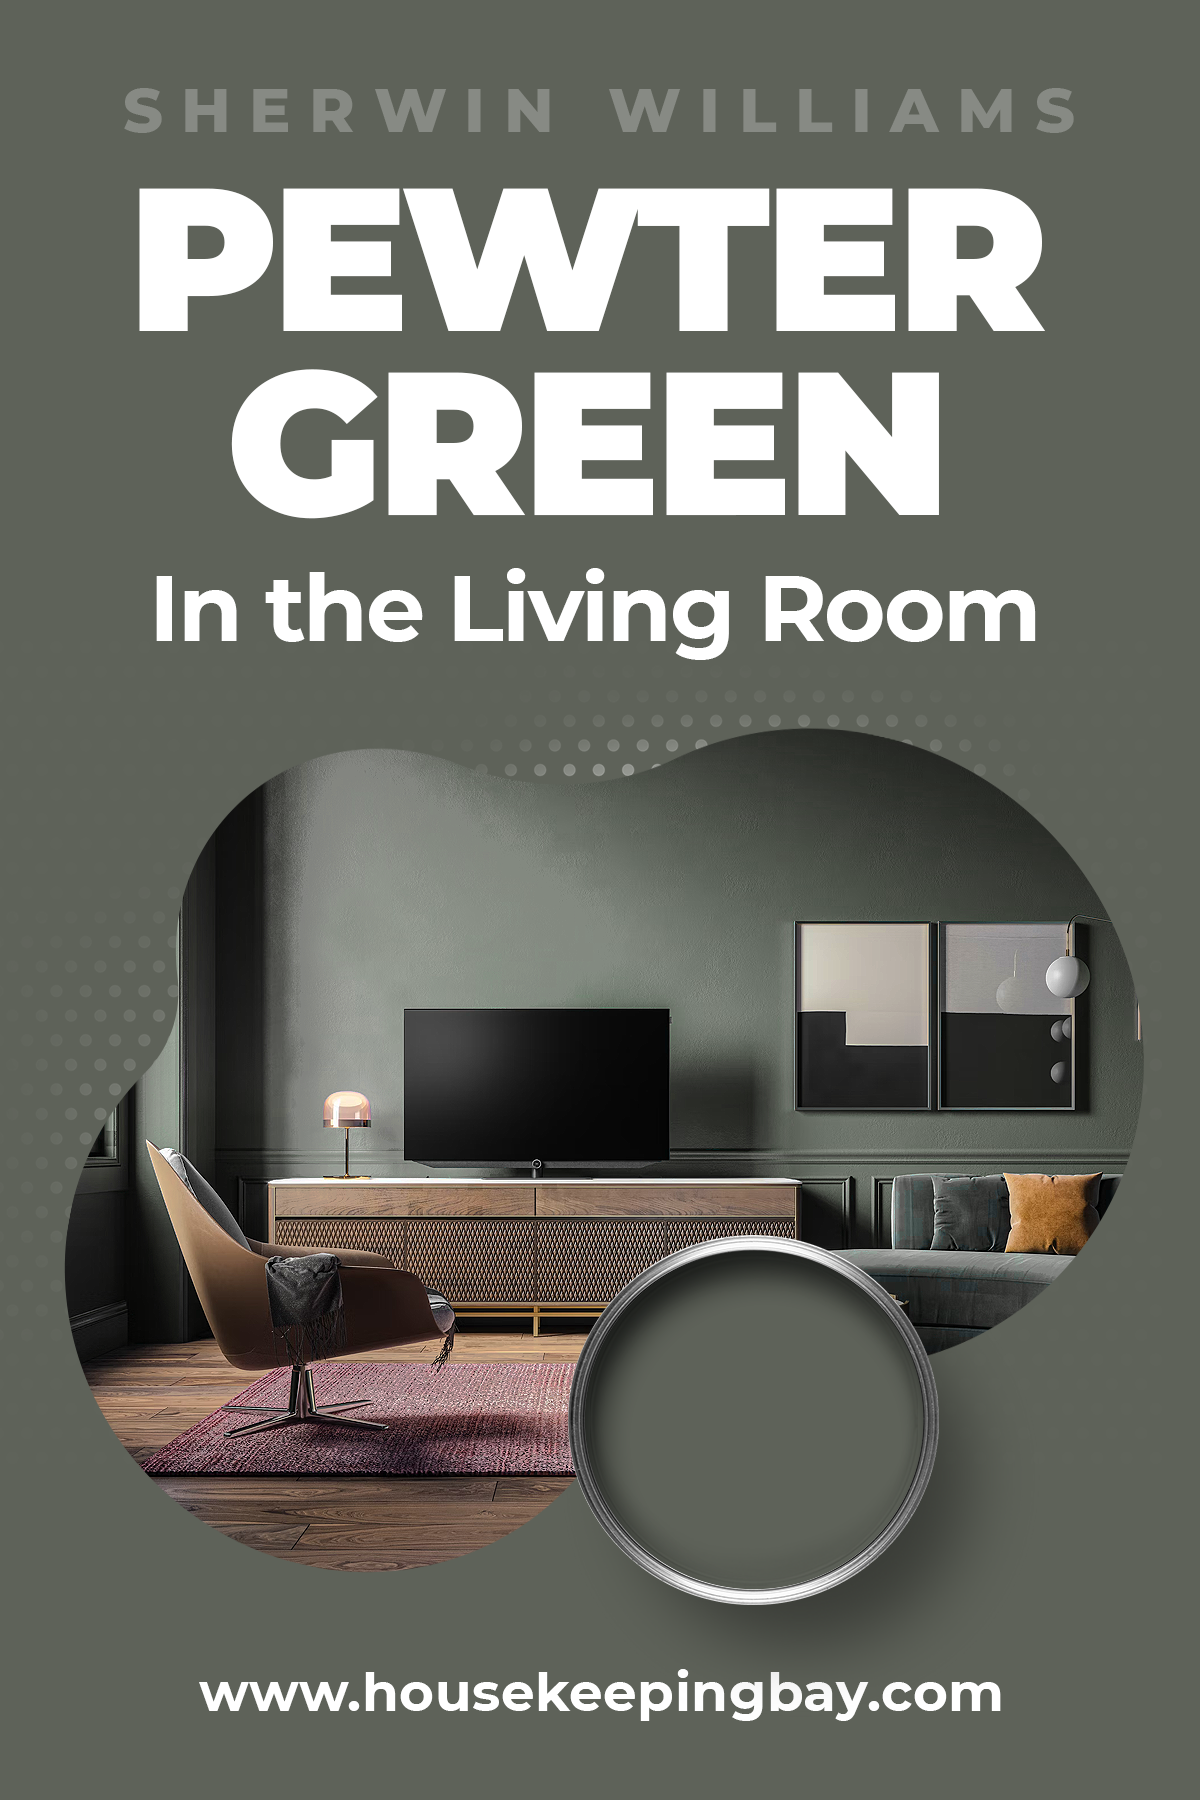 Sherwin Williams Pewter Green in the living Room